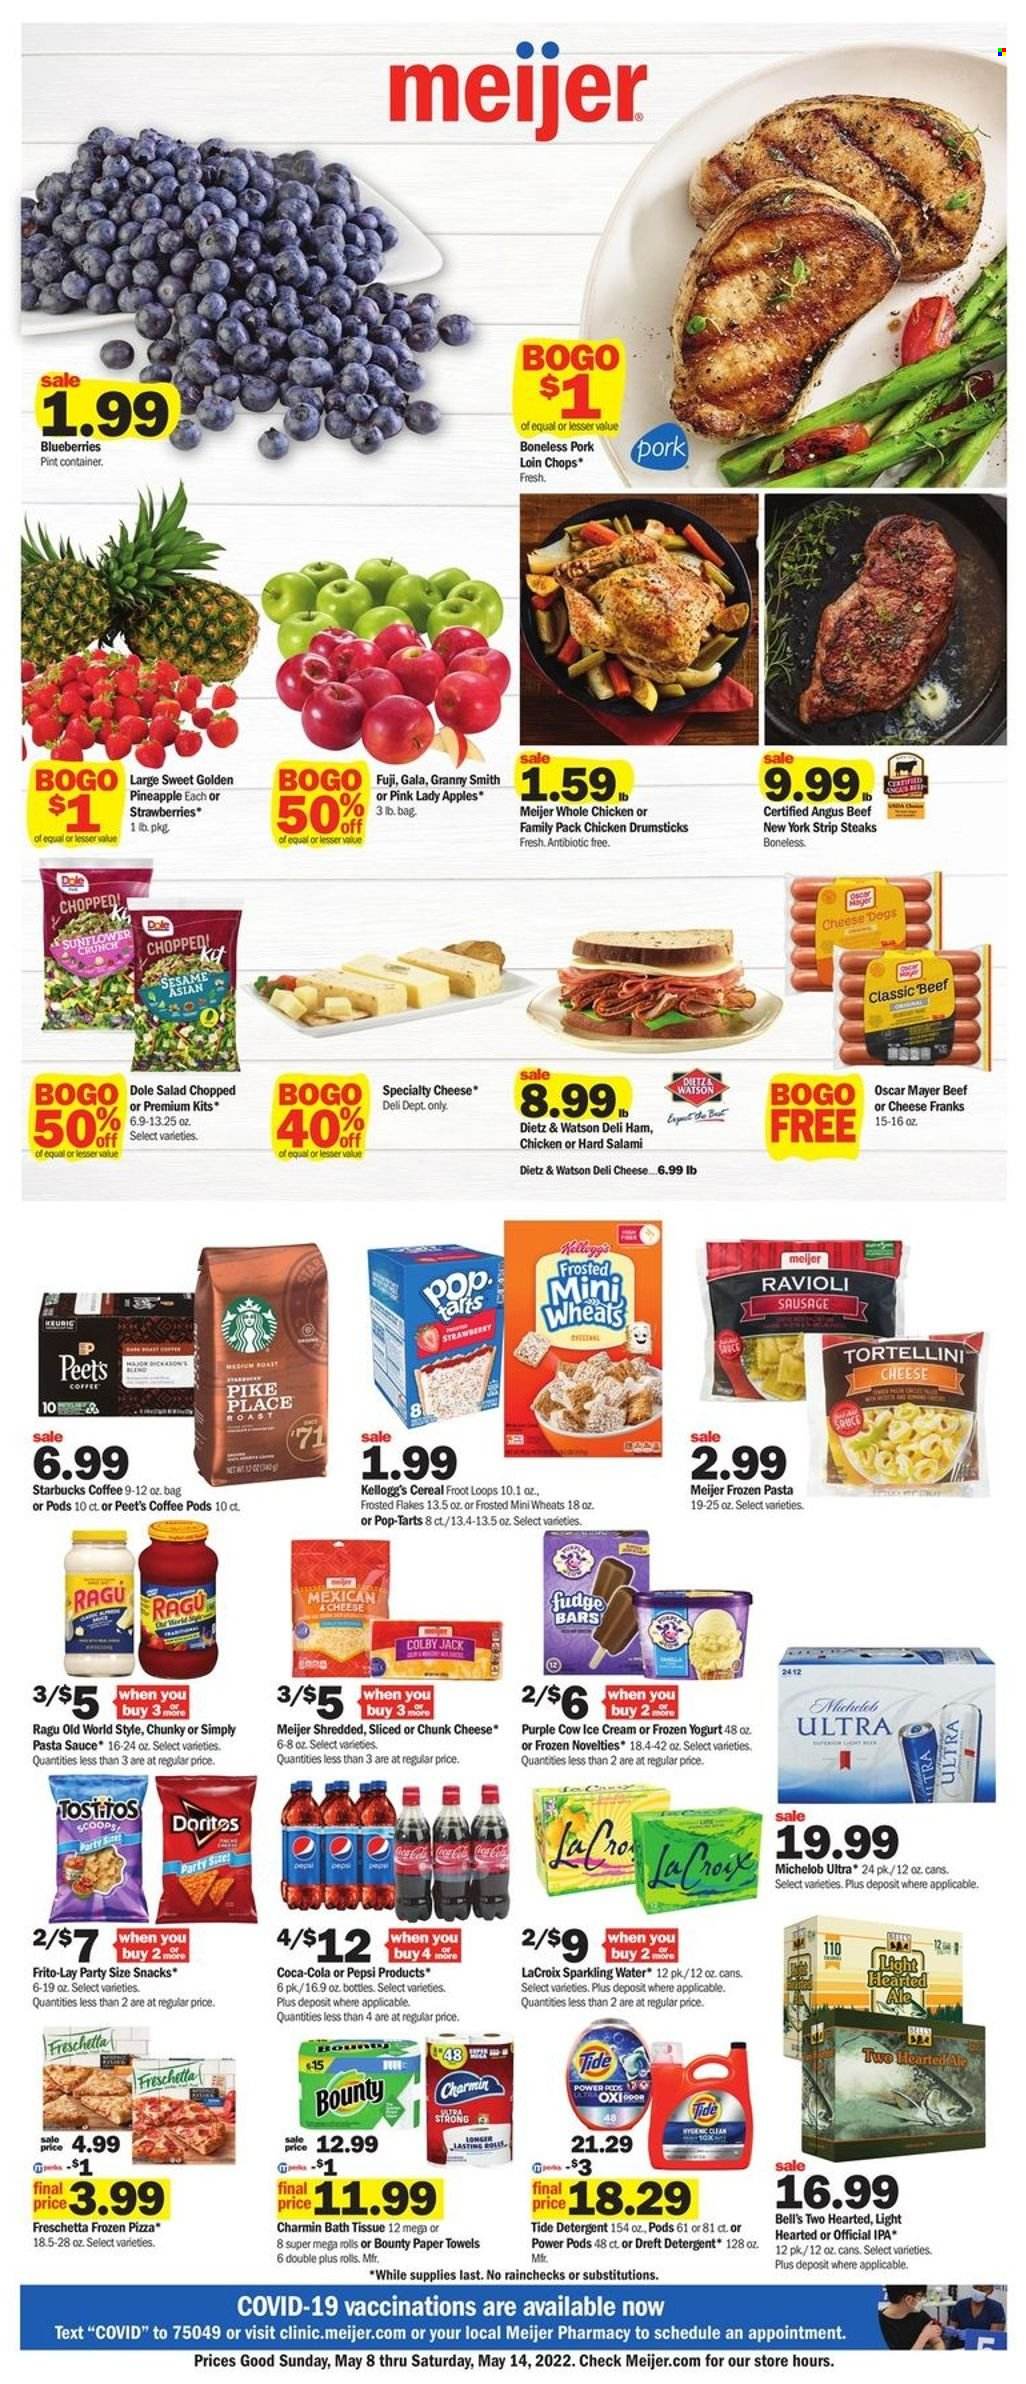 Meijer Flyer - 05/08/2022 - 05/14/2022 - Sales products - salad, Dole, apples, blueberries, Gala apple, strawberries, pineapple, Granny Smith apple, Pink Lady apples, ravioli, pizza, pasta sauce, sauce, tortellini, salami, ham, Oscar Mayer, Dietz & Watson, sausage, colby cheese, chunk cheese, yoghurt, ice cream, Fudge, snack, Bounty, Kellogg's, Pop-Tarts, Doritos, Frito-Lay, Tostitos, cereals, Frosted Flakes, ragu, Coca-Cola, Pepsi, sparkling water, coffee pods, Starbucks, beer, IPA, whole chicken, chicken drumsticks, chicken meat, beef meat, steak, striploin steak, pork chops, pork loin, pork meat, bath tissue, kitchen towels, paper towels, Charmin, detergent, Tide, container, Michelob. Page 1.